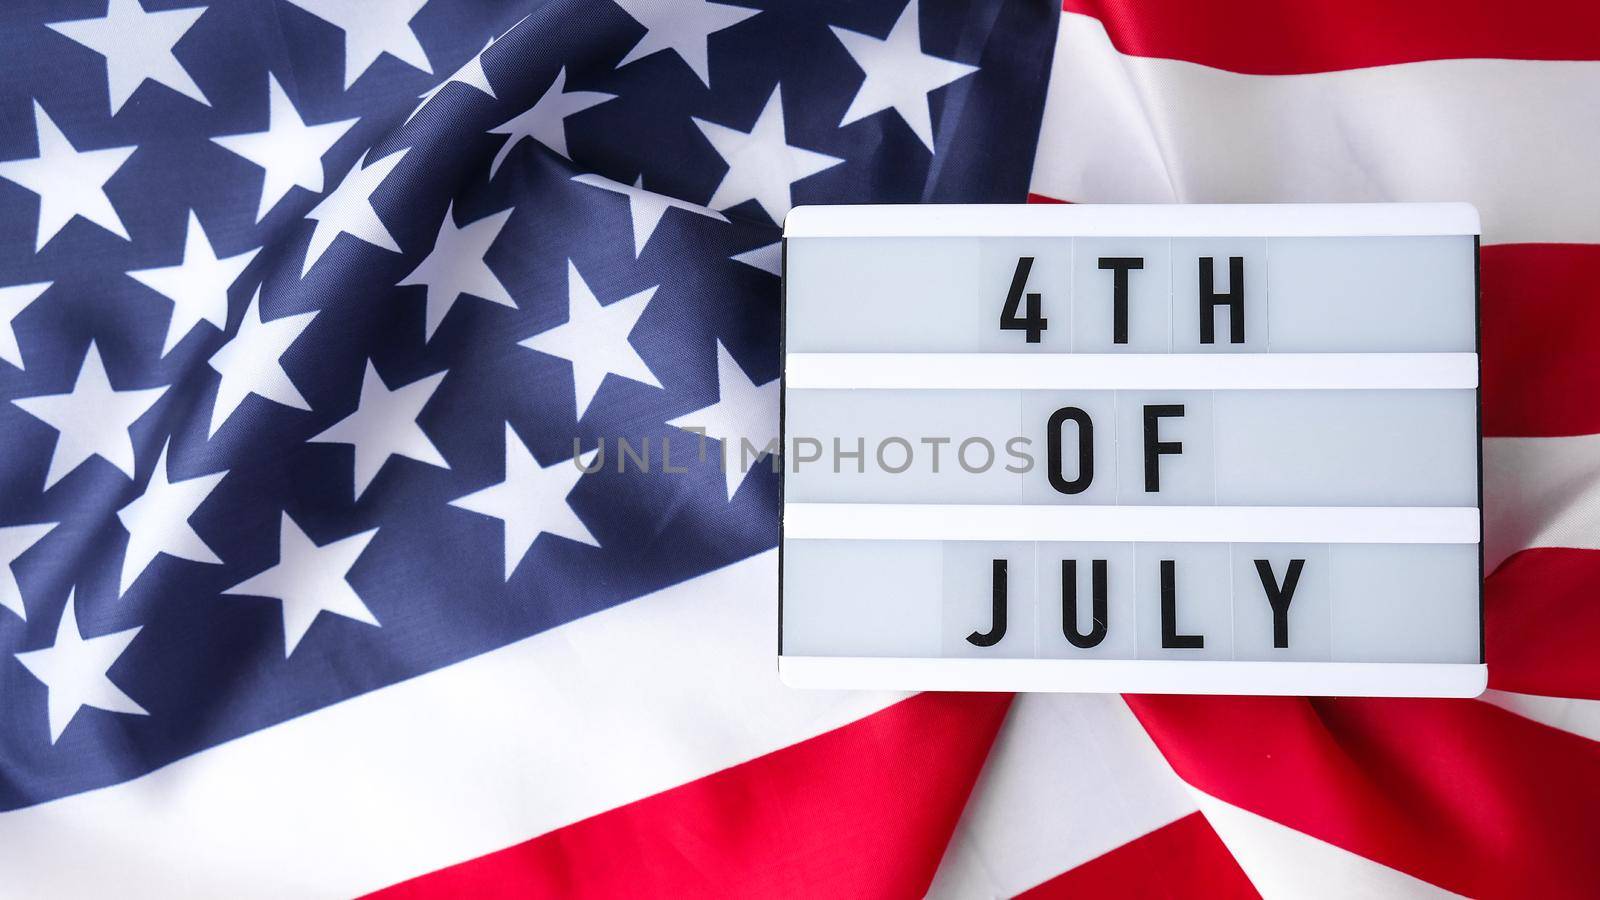 American flag. Lightbox with text 4TH OF JULY Flag of the united states of America. July 4th Independence Day. USA patriotism national holiday. Usa proud. by anna_stasiia